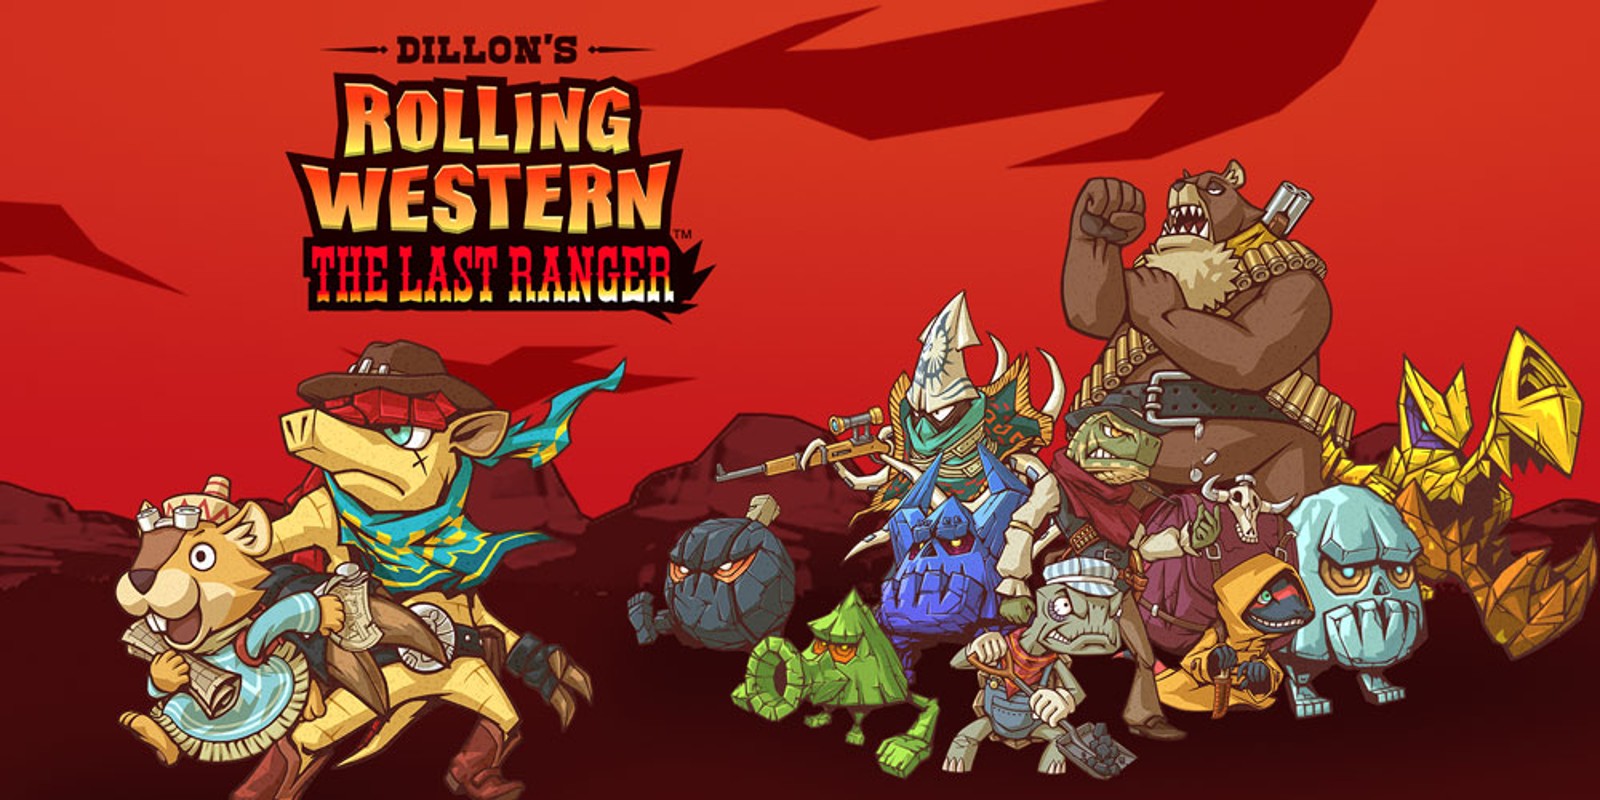 Last rolling. Dillon's Rolling Western 3ds. Dillon's Rolling Western: the last Ranger. Dillon's Rolling Western 3ds Gameplay. Рек Роллинг ДС.